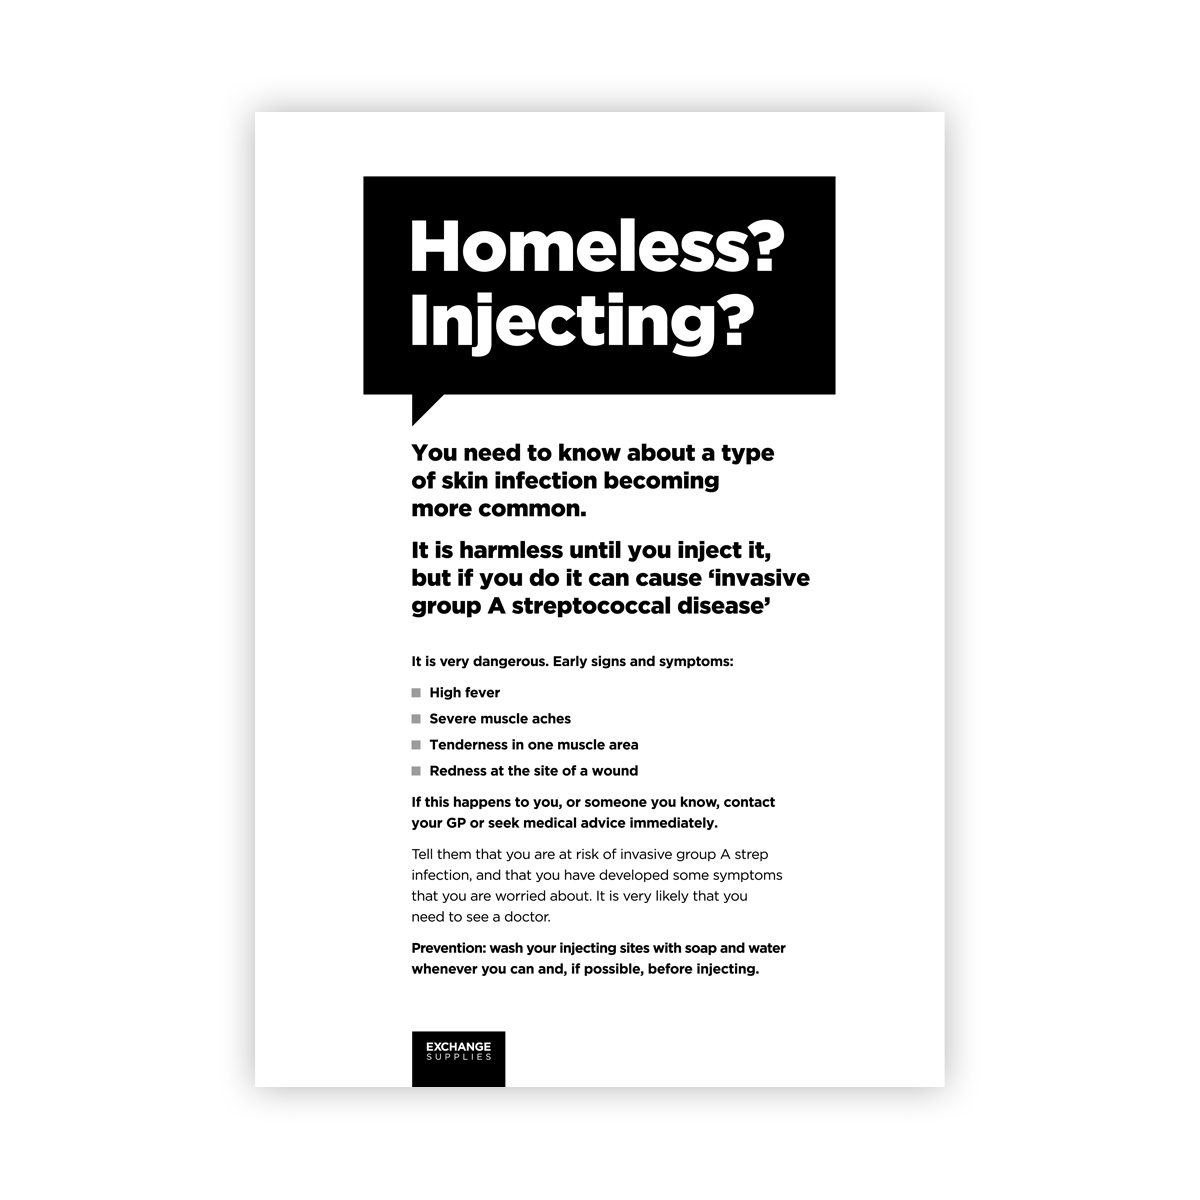 Poster for homeless injectors